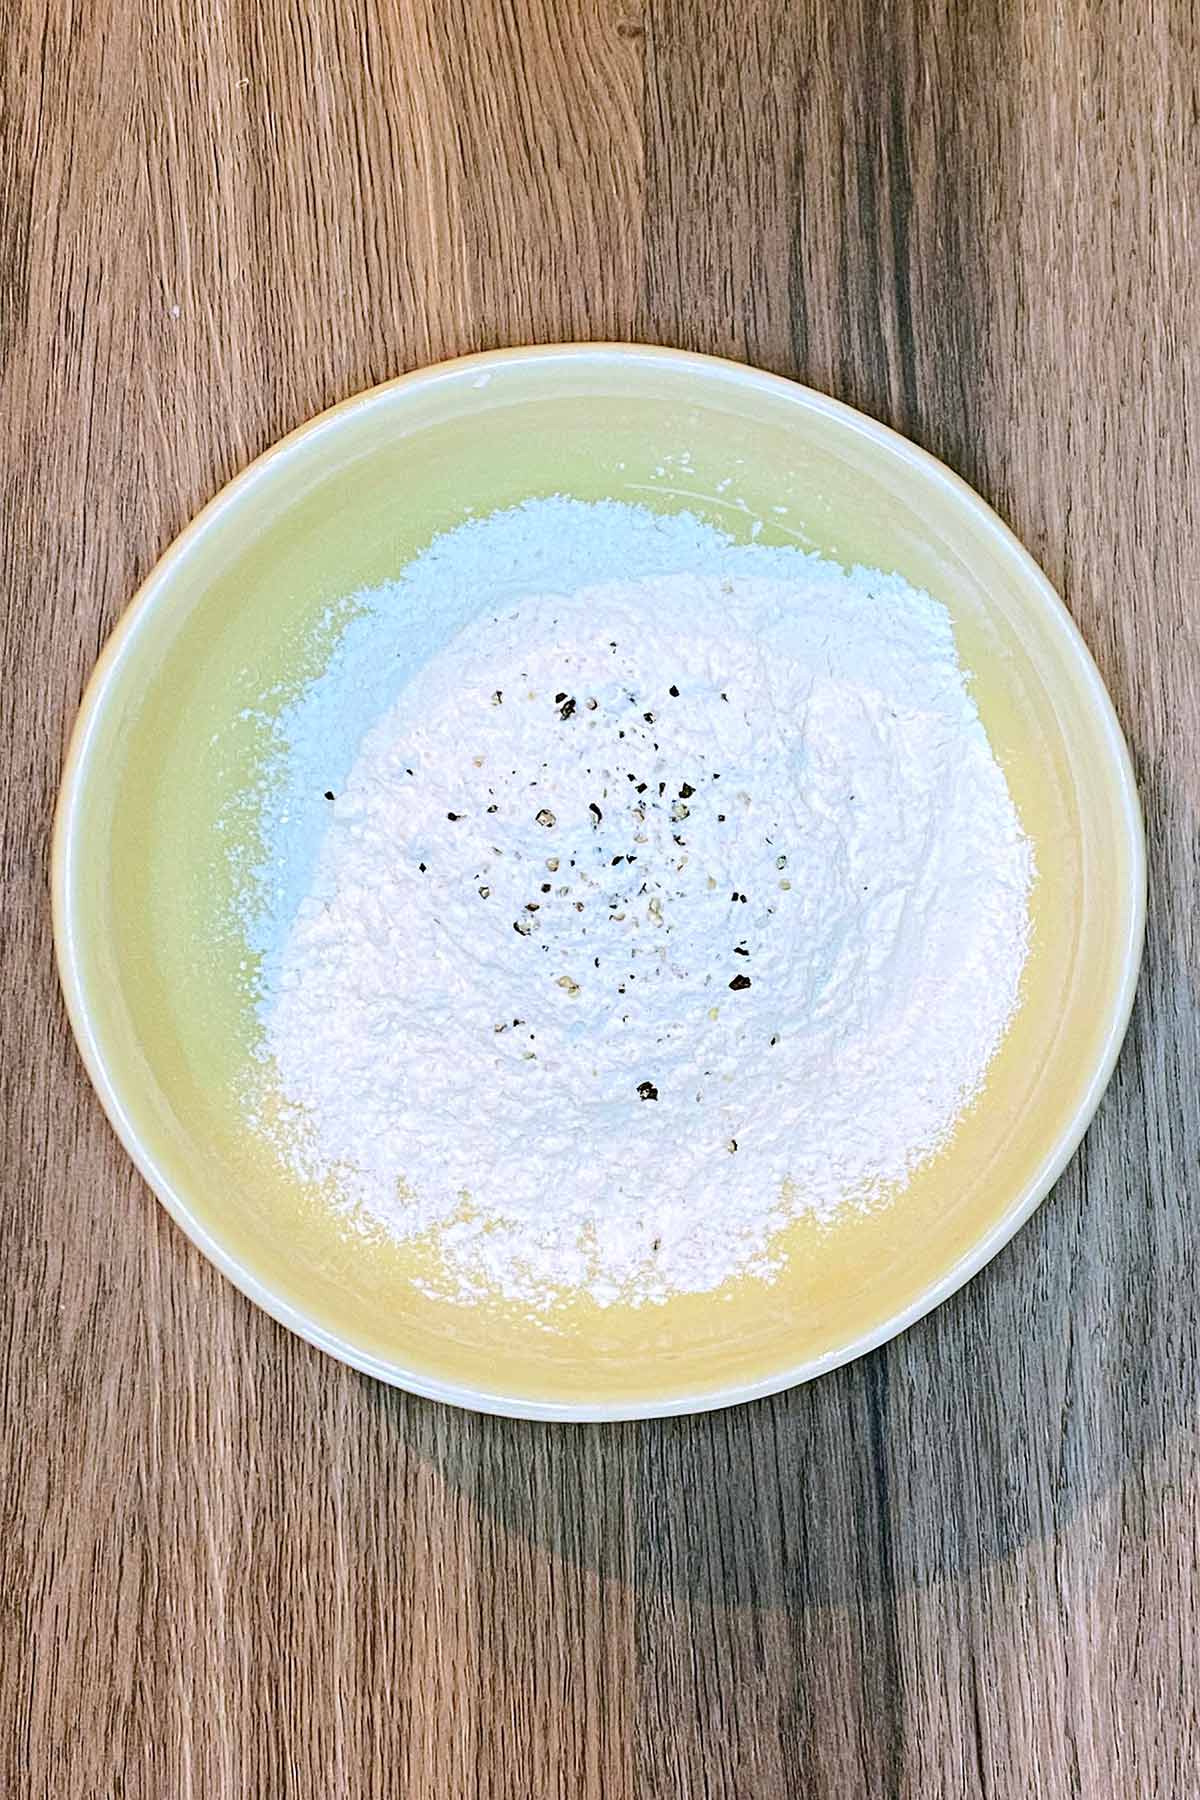 A bowl of flour with salt and pepper in it.